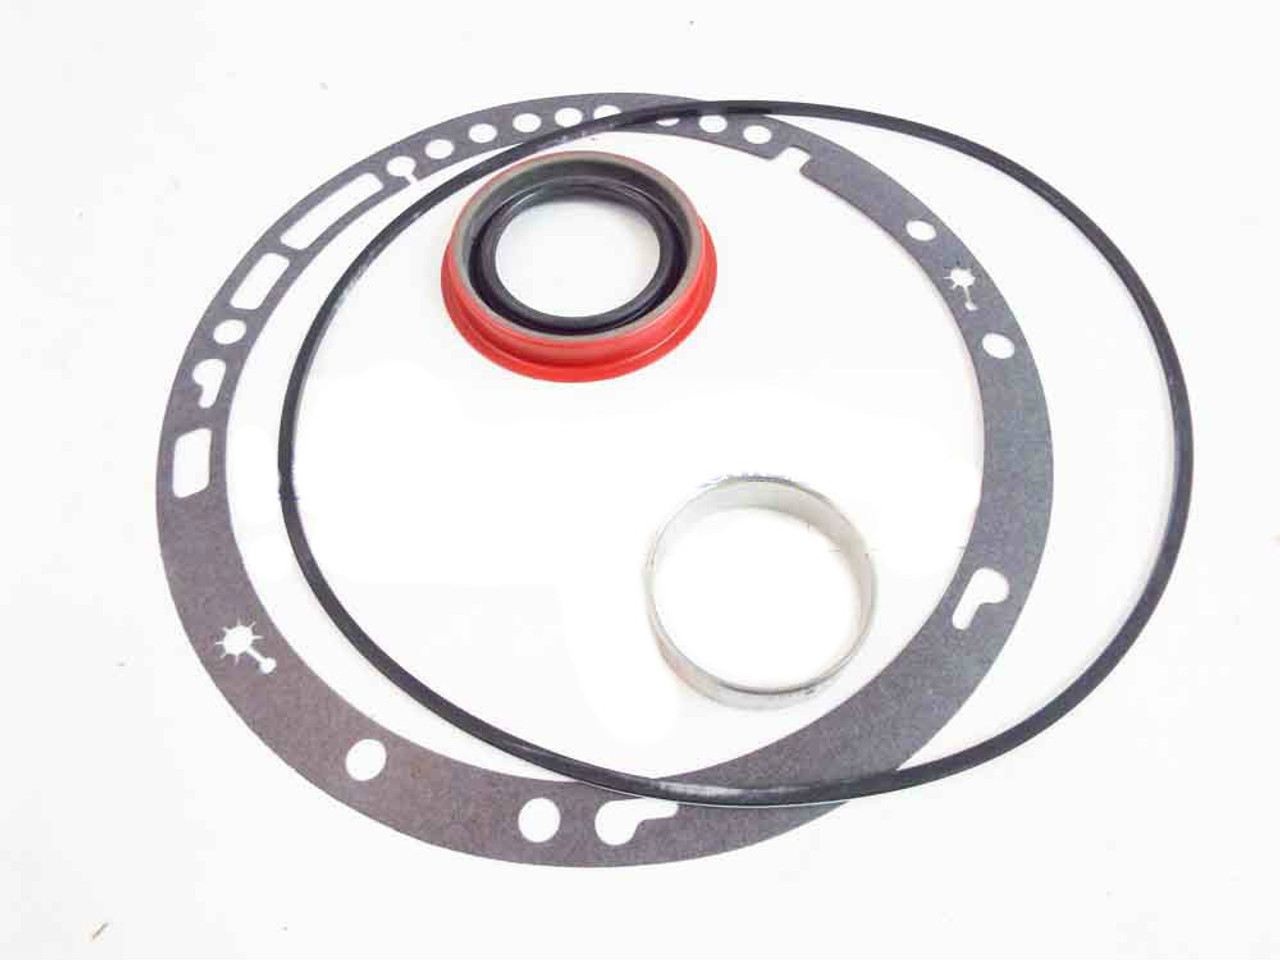 GM Turbo TH350 Front Pump Gasket 8640671 